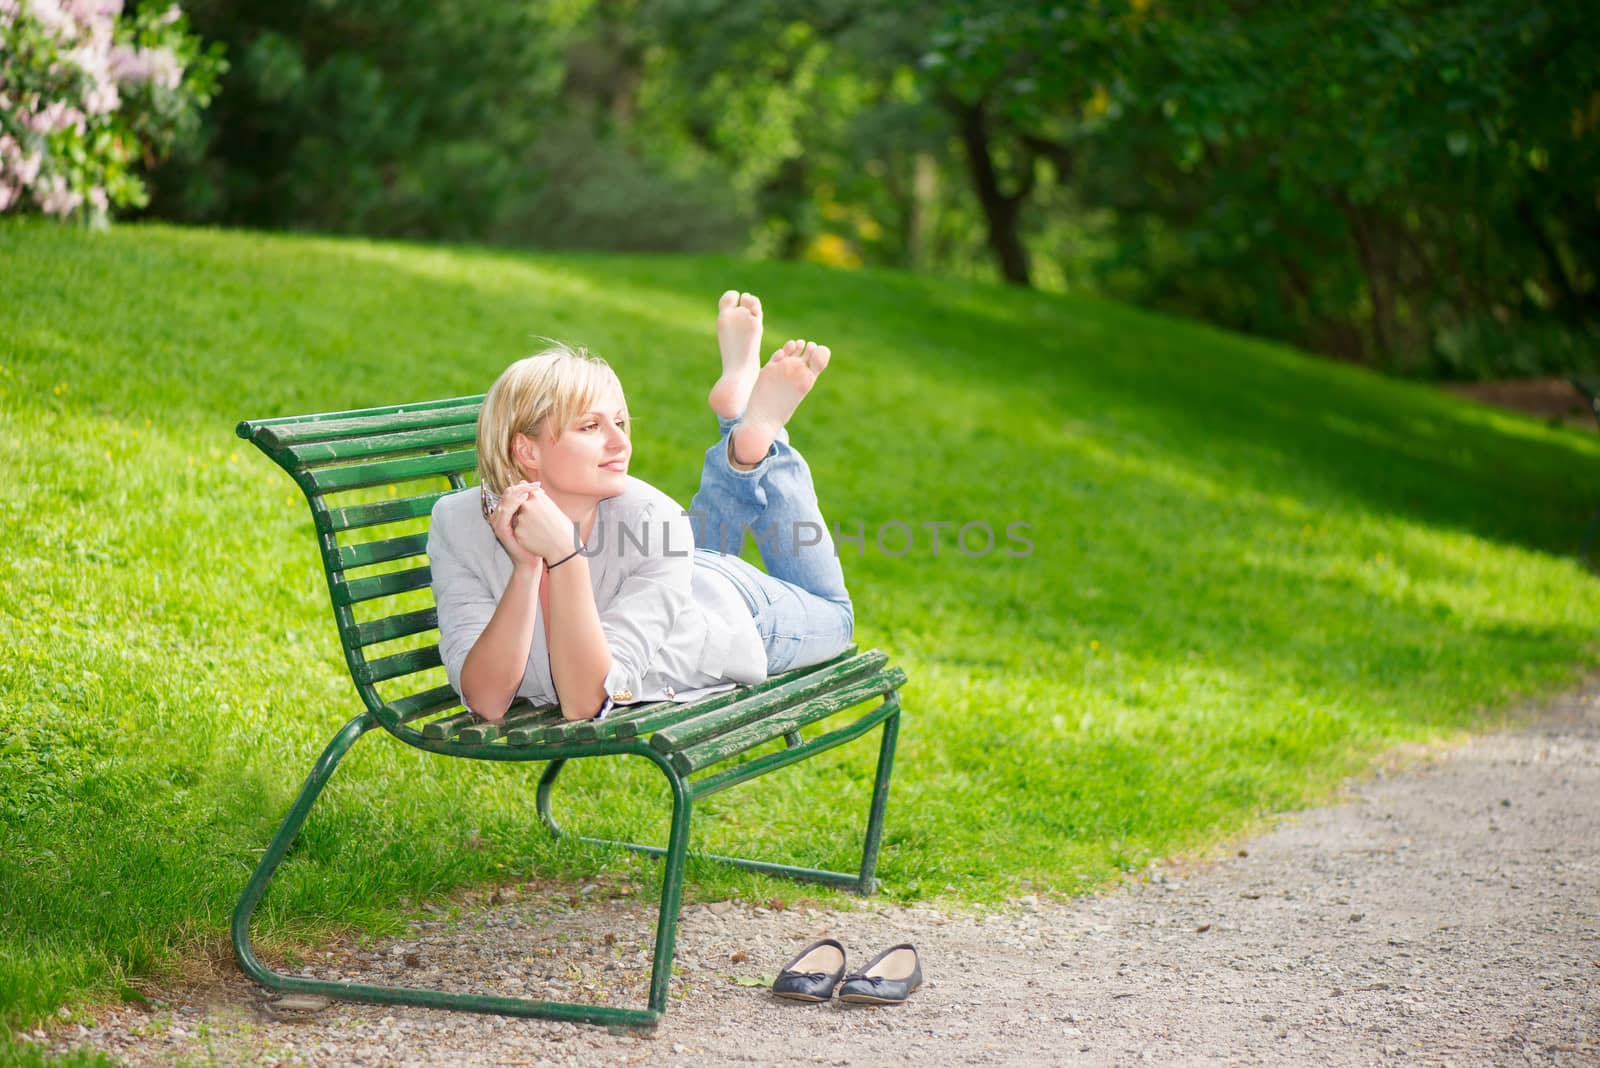 Young woman laying on bench in park and smiling